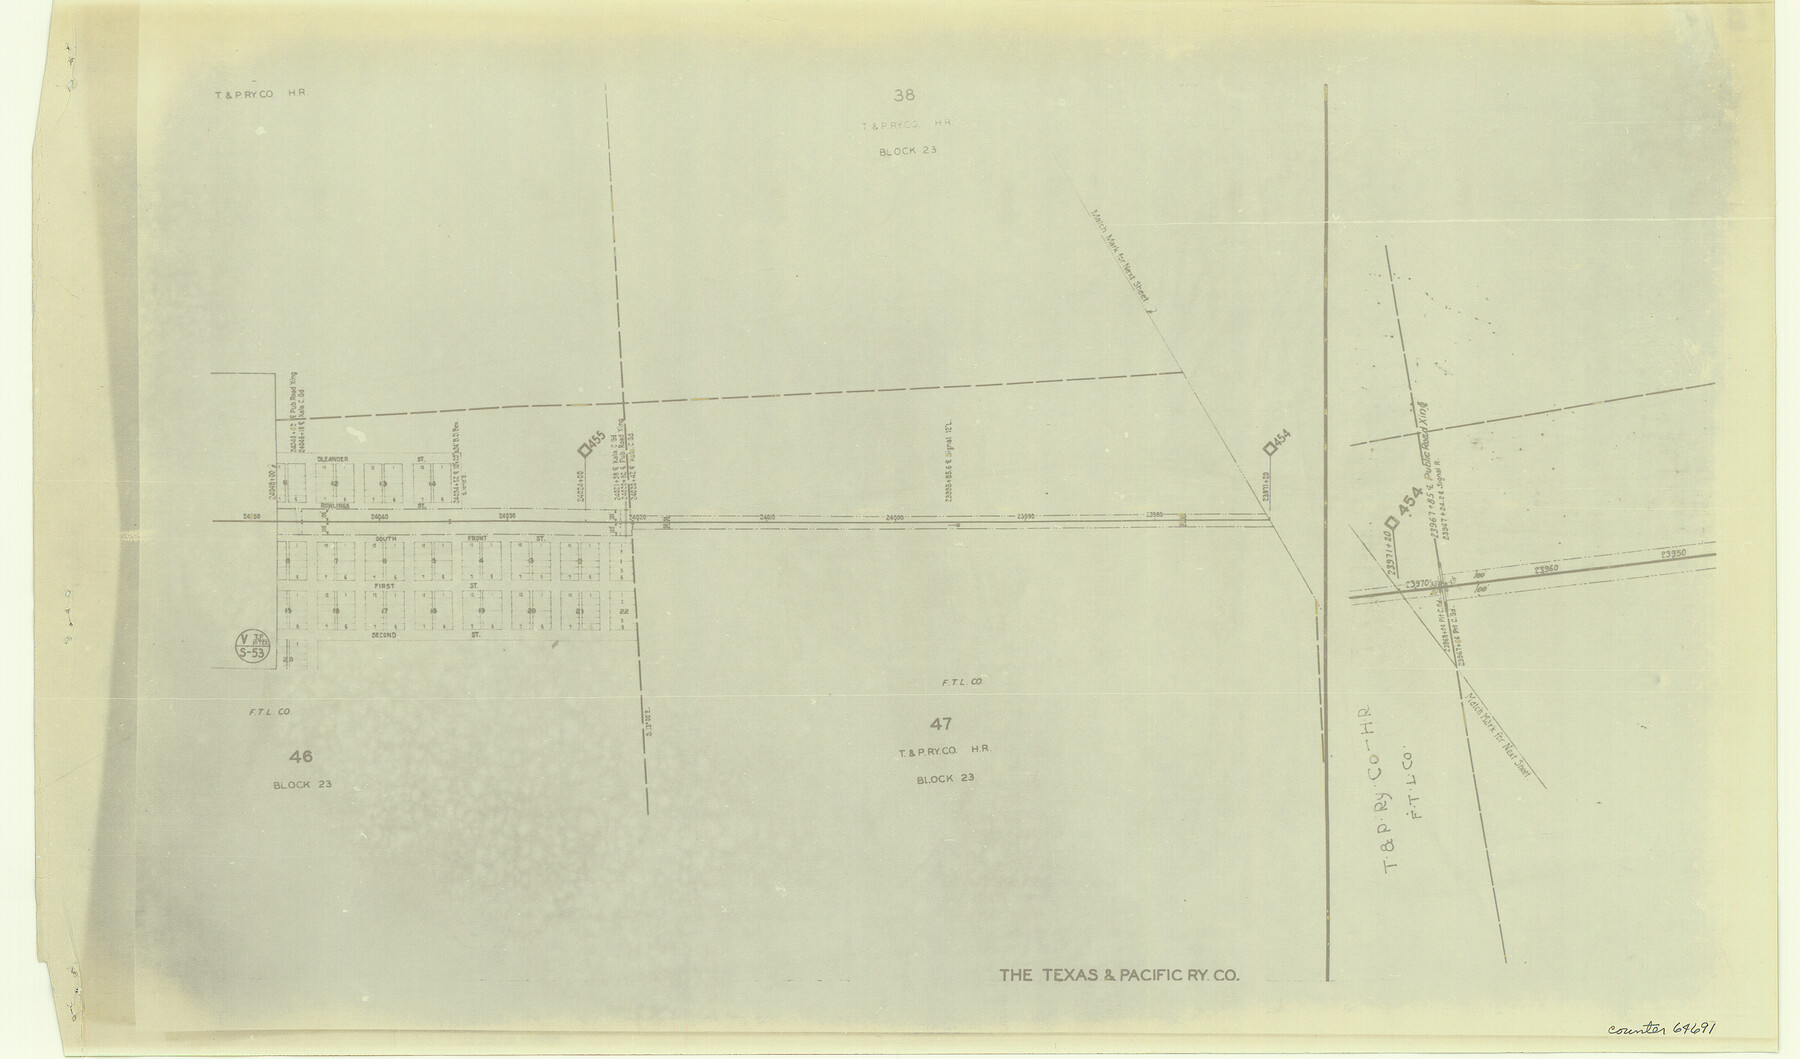 64691, [Right of Way & Track Map, The Texas & Pacific Ry. Co. Main Line], General Map Collection